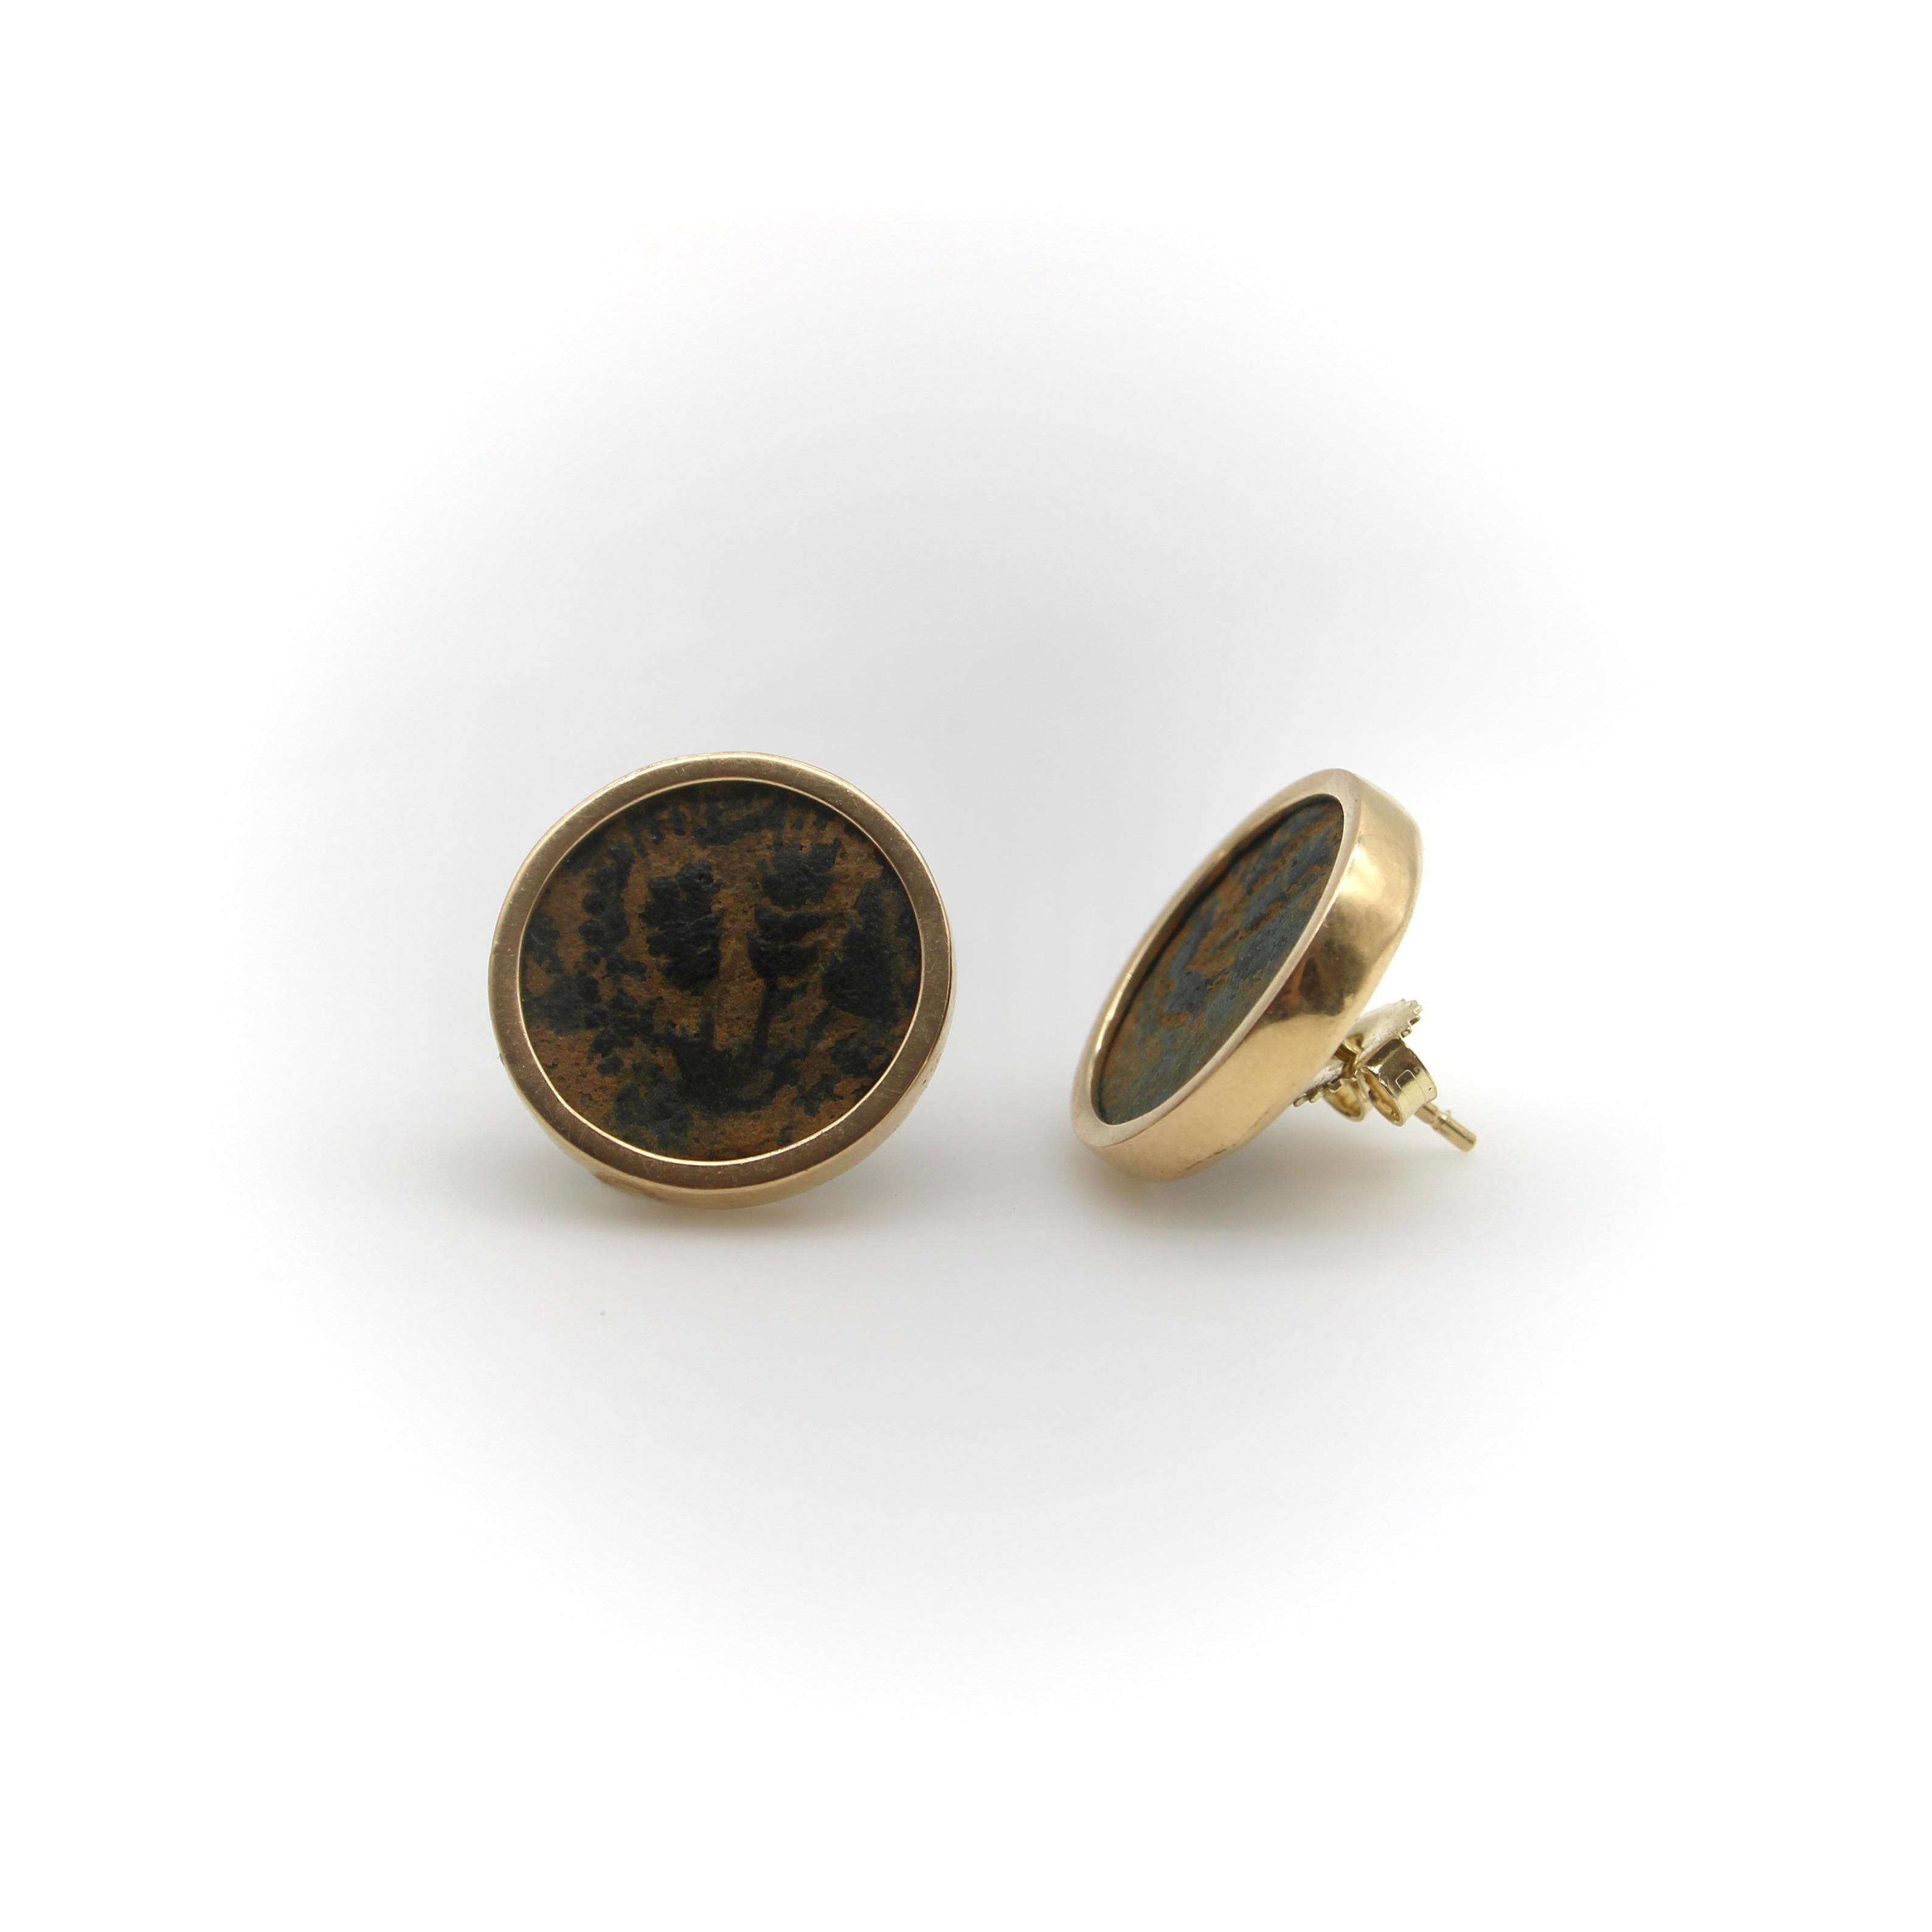 King Agrippa I Ancient Coin Earrings Set in 14K Gold In Good Condition For Sale In Venice, CA